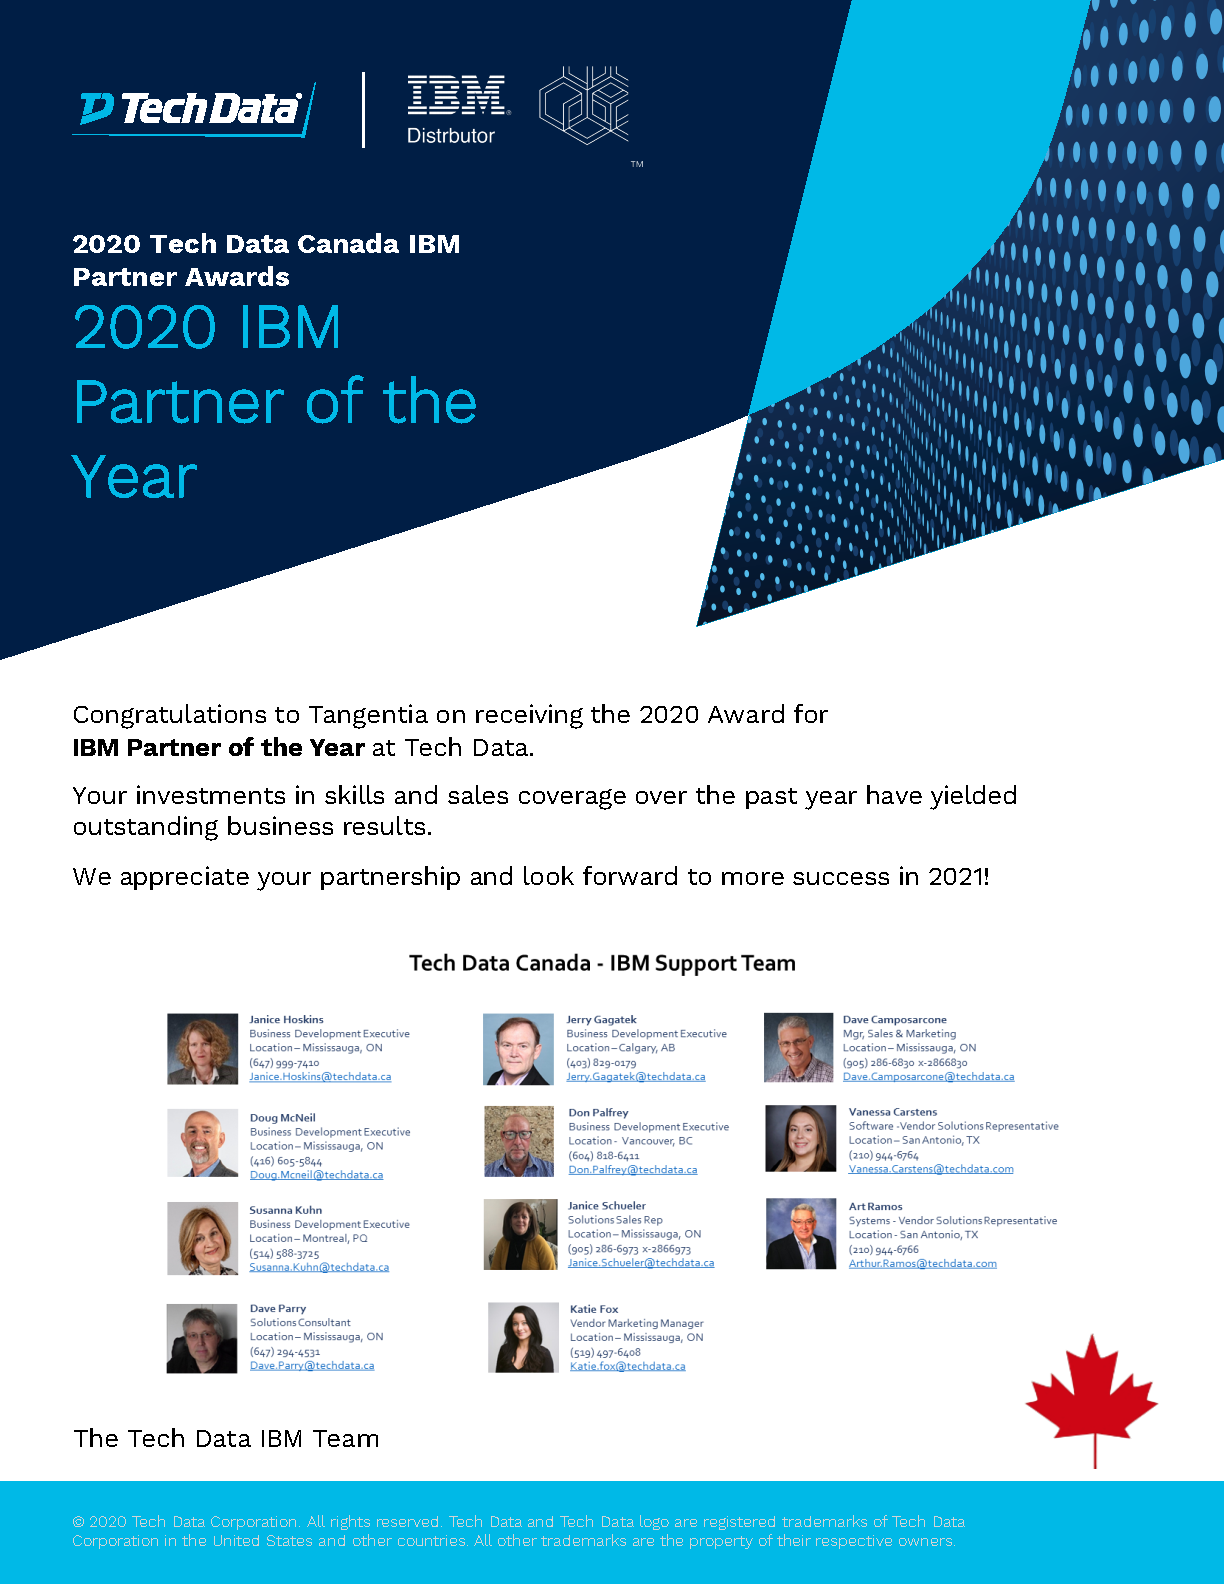 Tangentia | Tangentia is recognized with the highly regarded “2020 IBM Partner of the Year” award as part of the 2020 Tech Data Canada IBM Partner Awards